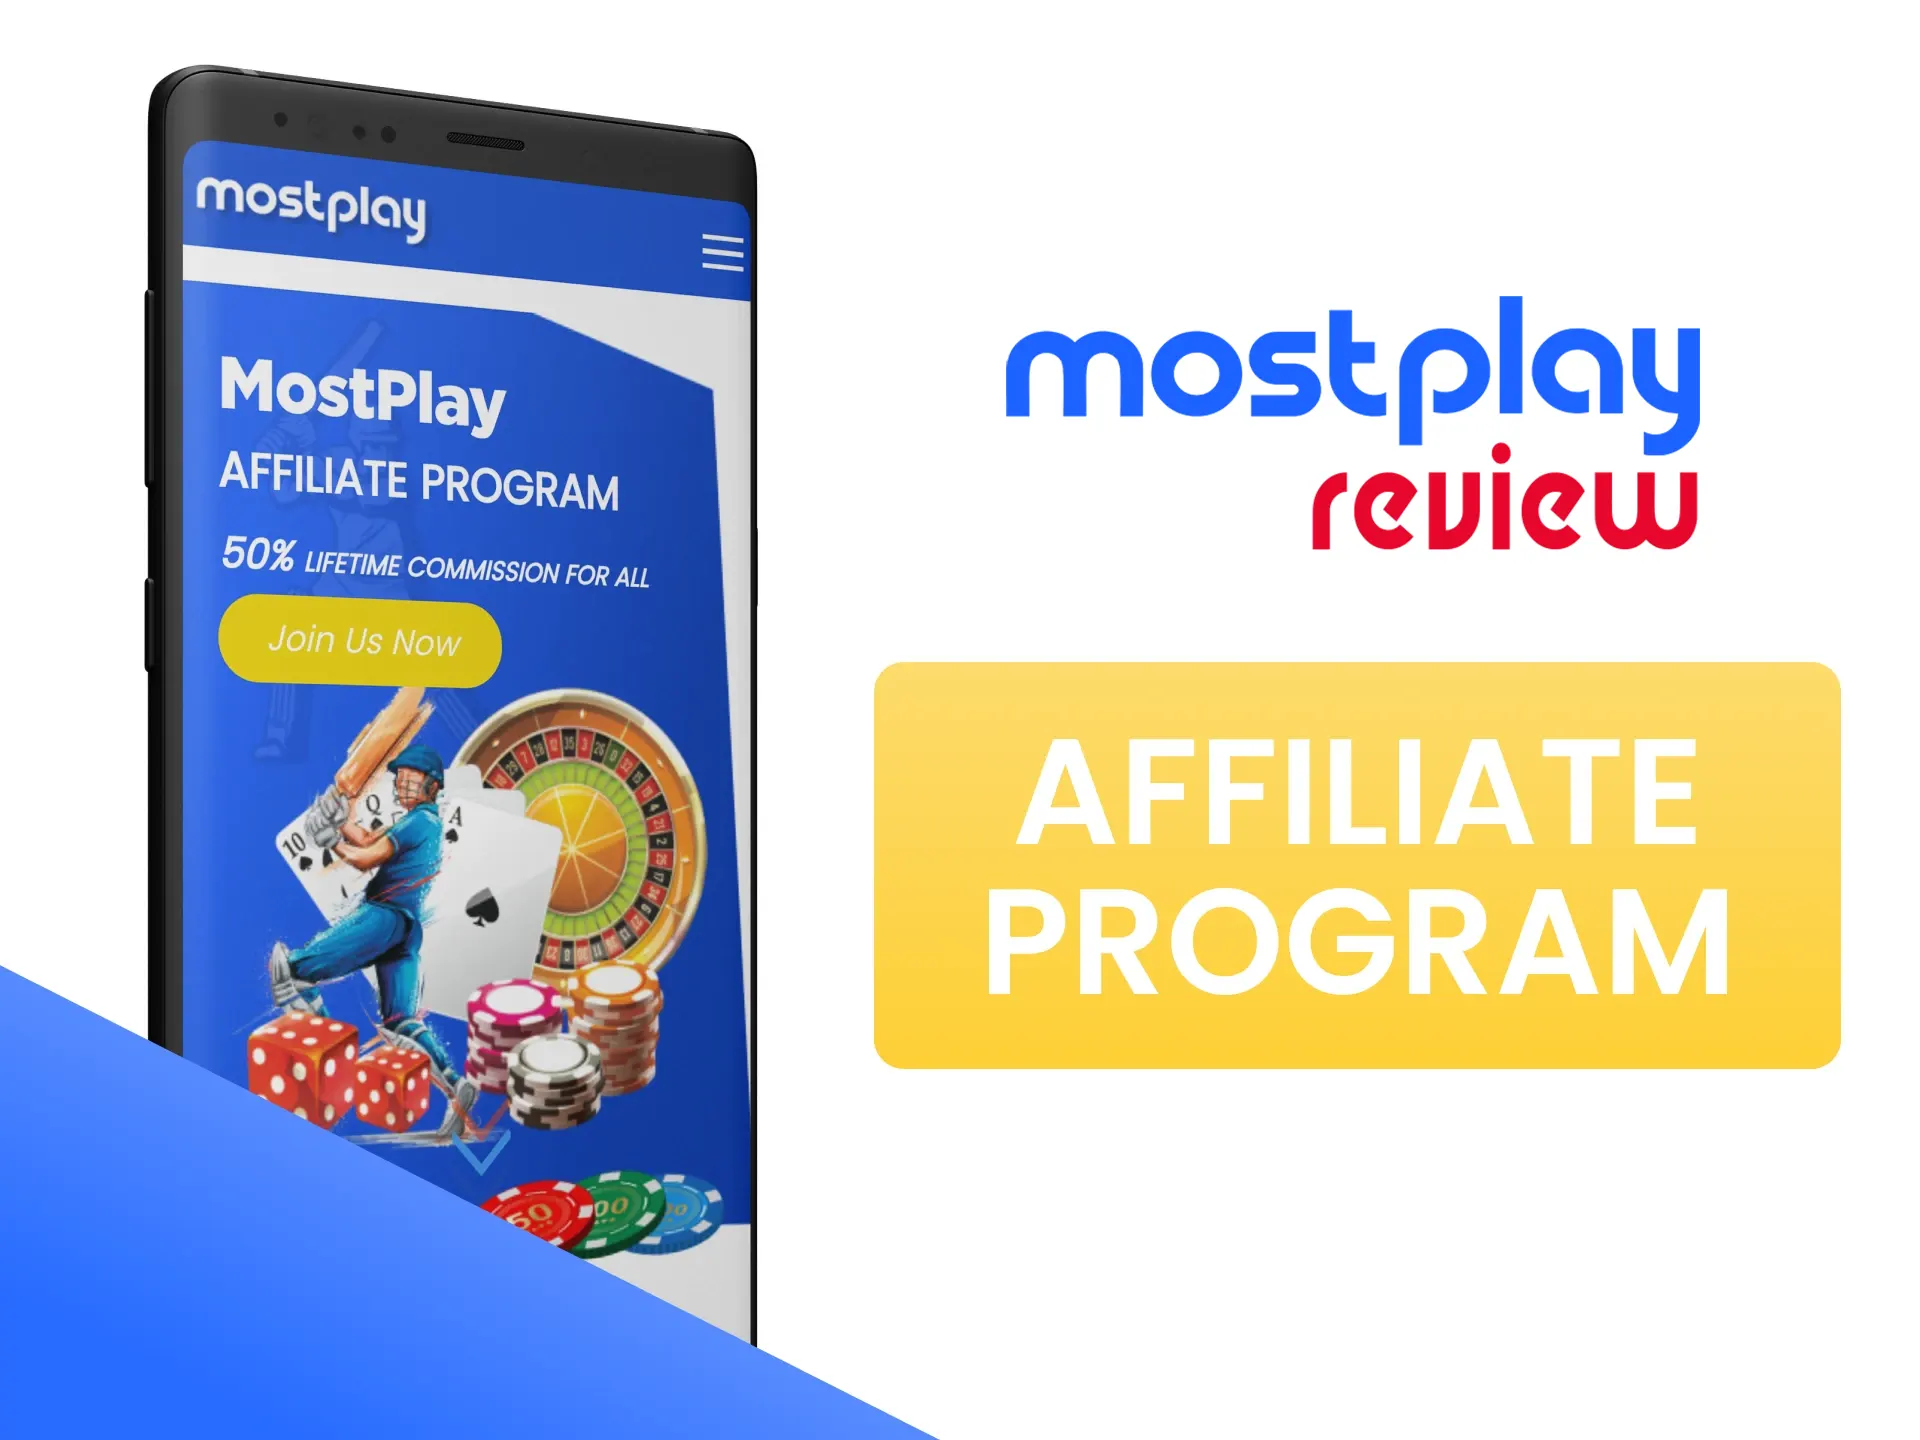 Participate in the affiliate program from Mostpaly.